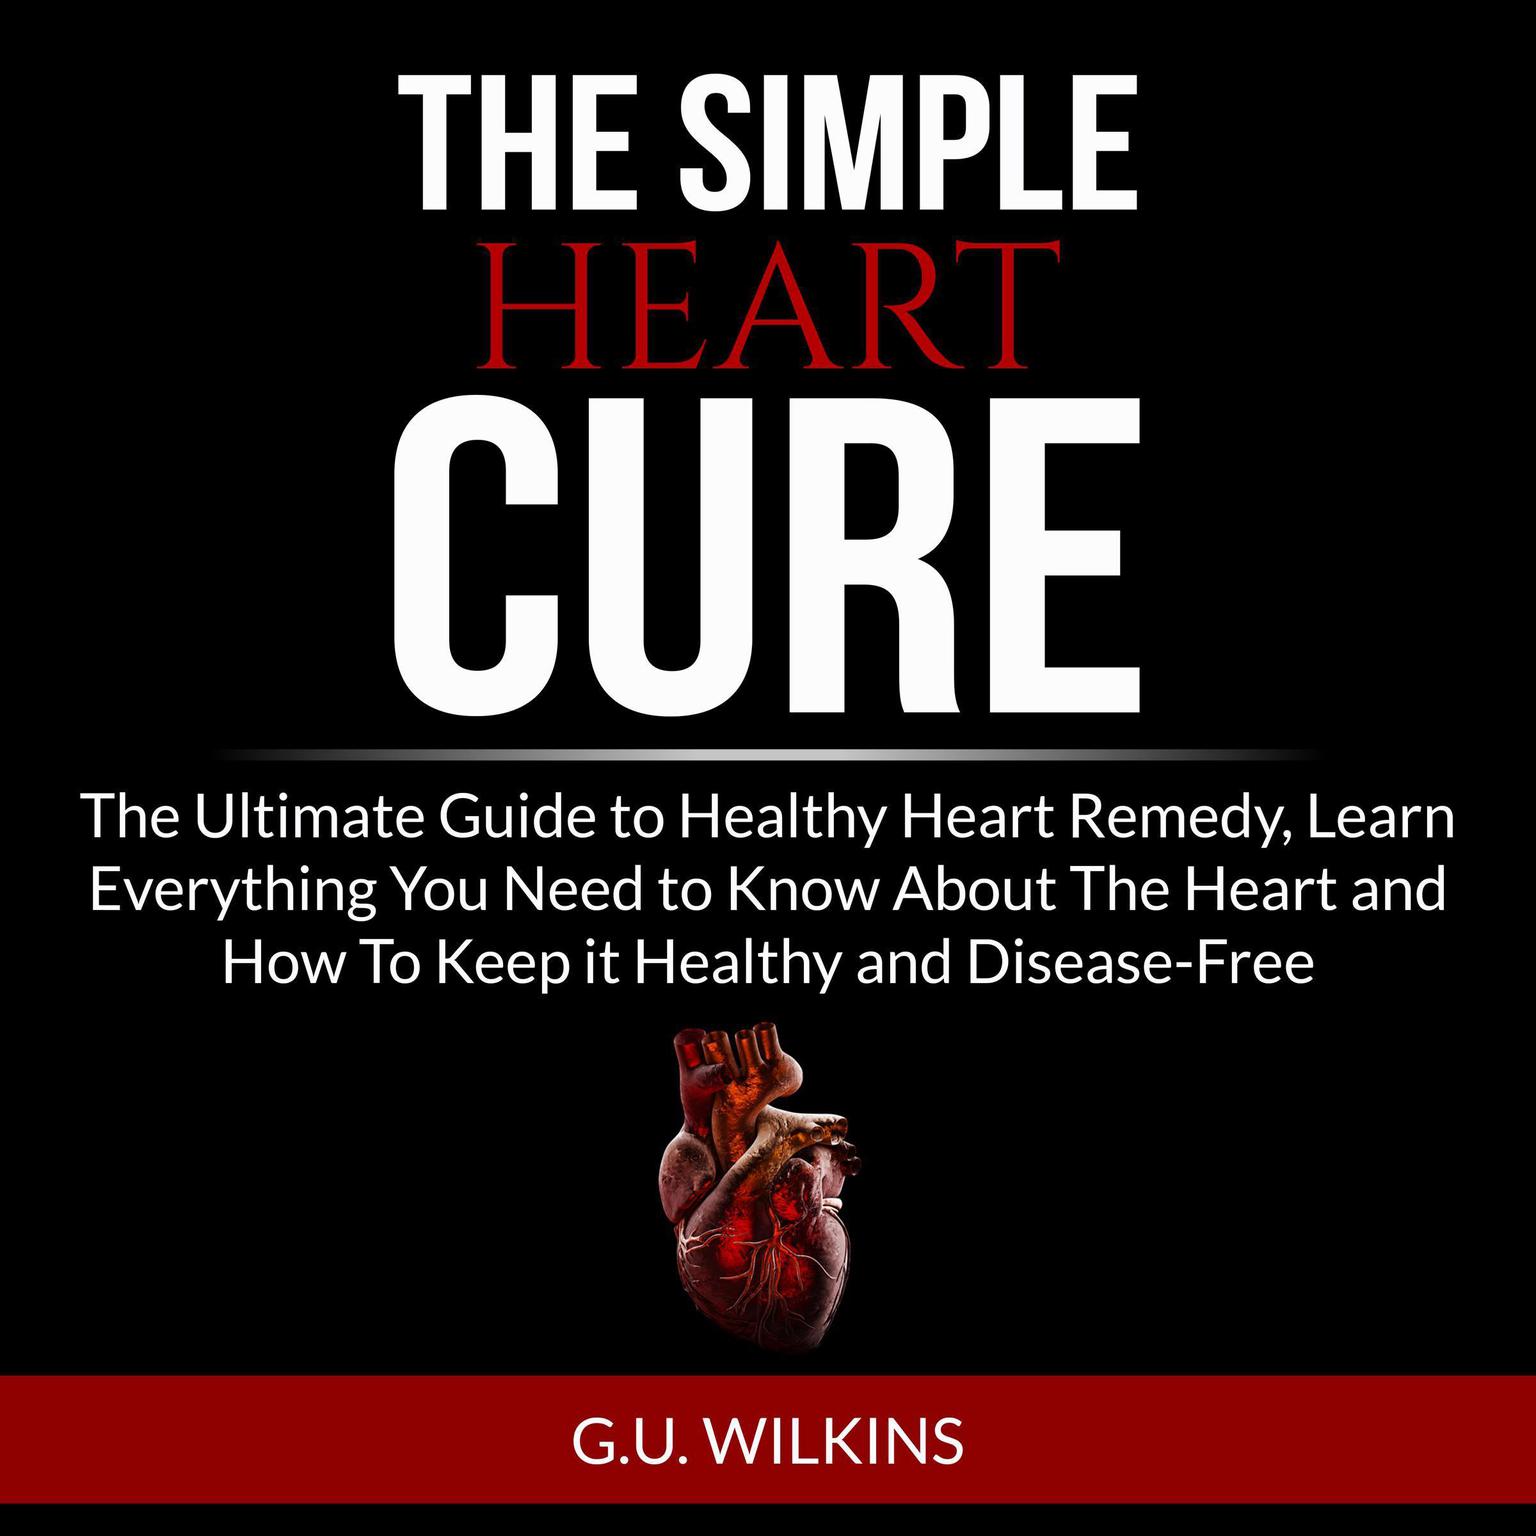 The Simple Heart Cure: The Ultimate Guide to Healthy Heart Remedy, Learn Everything You Need to Know About The Heart and How To Keep it Healthy and Disease-Free Audiobook, by G.U. Wilkins